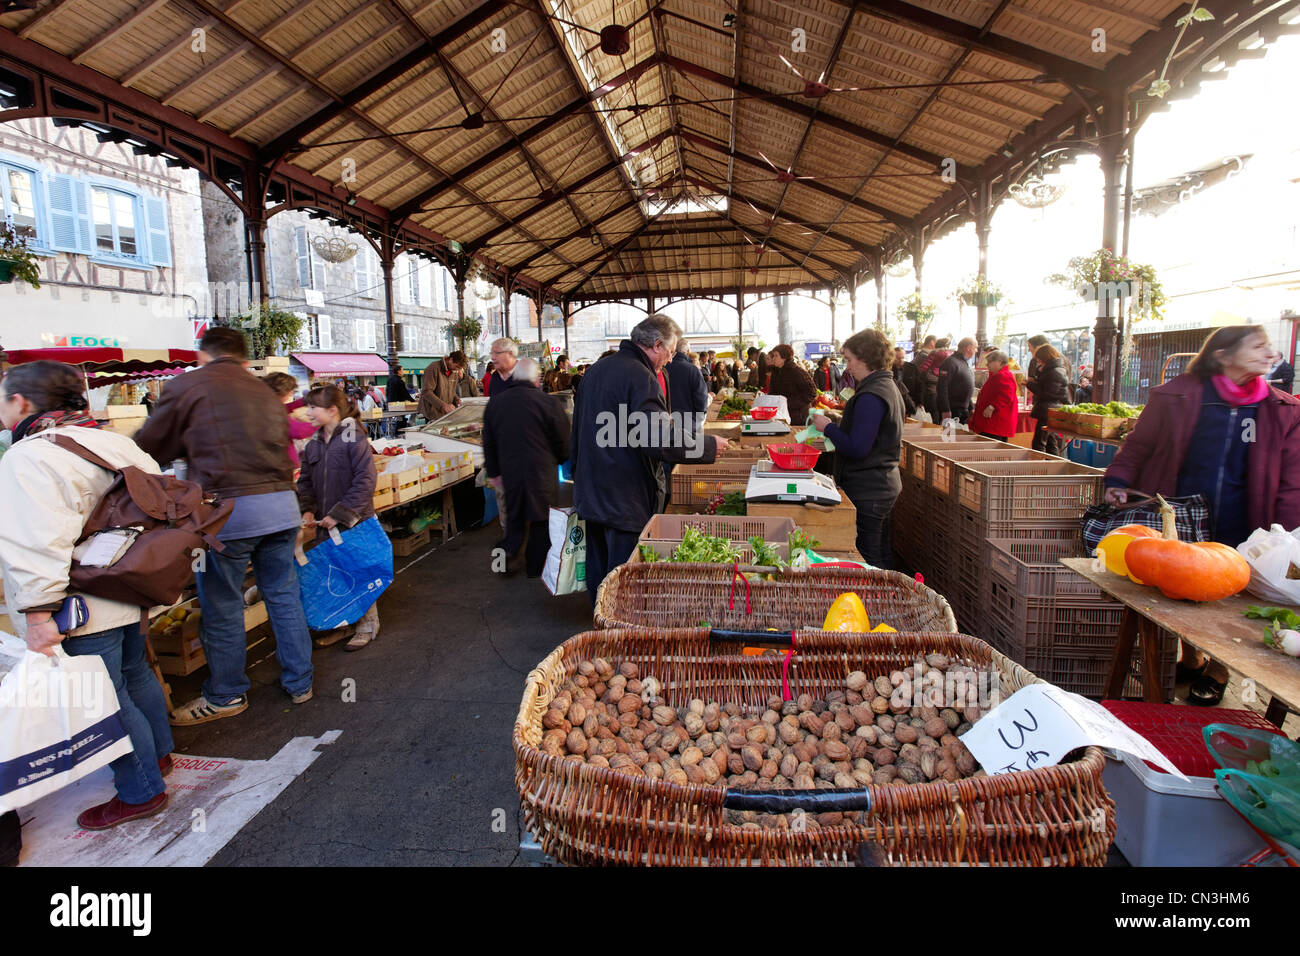 France, Lot, Figeac, the market on Place Carnot (Carnot square) Stock Photo